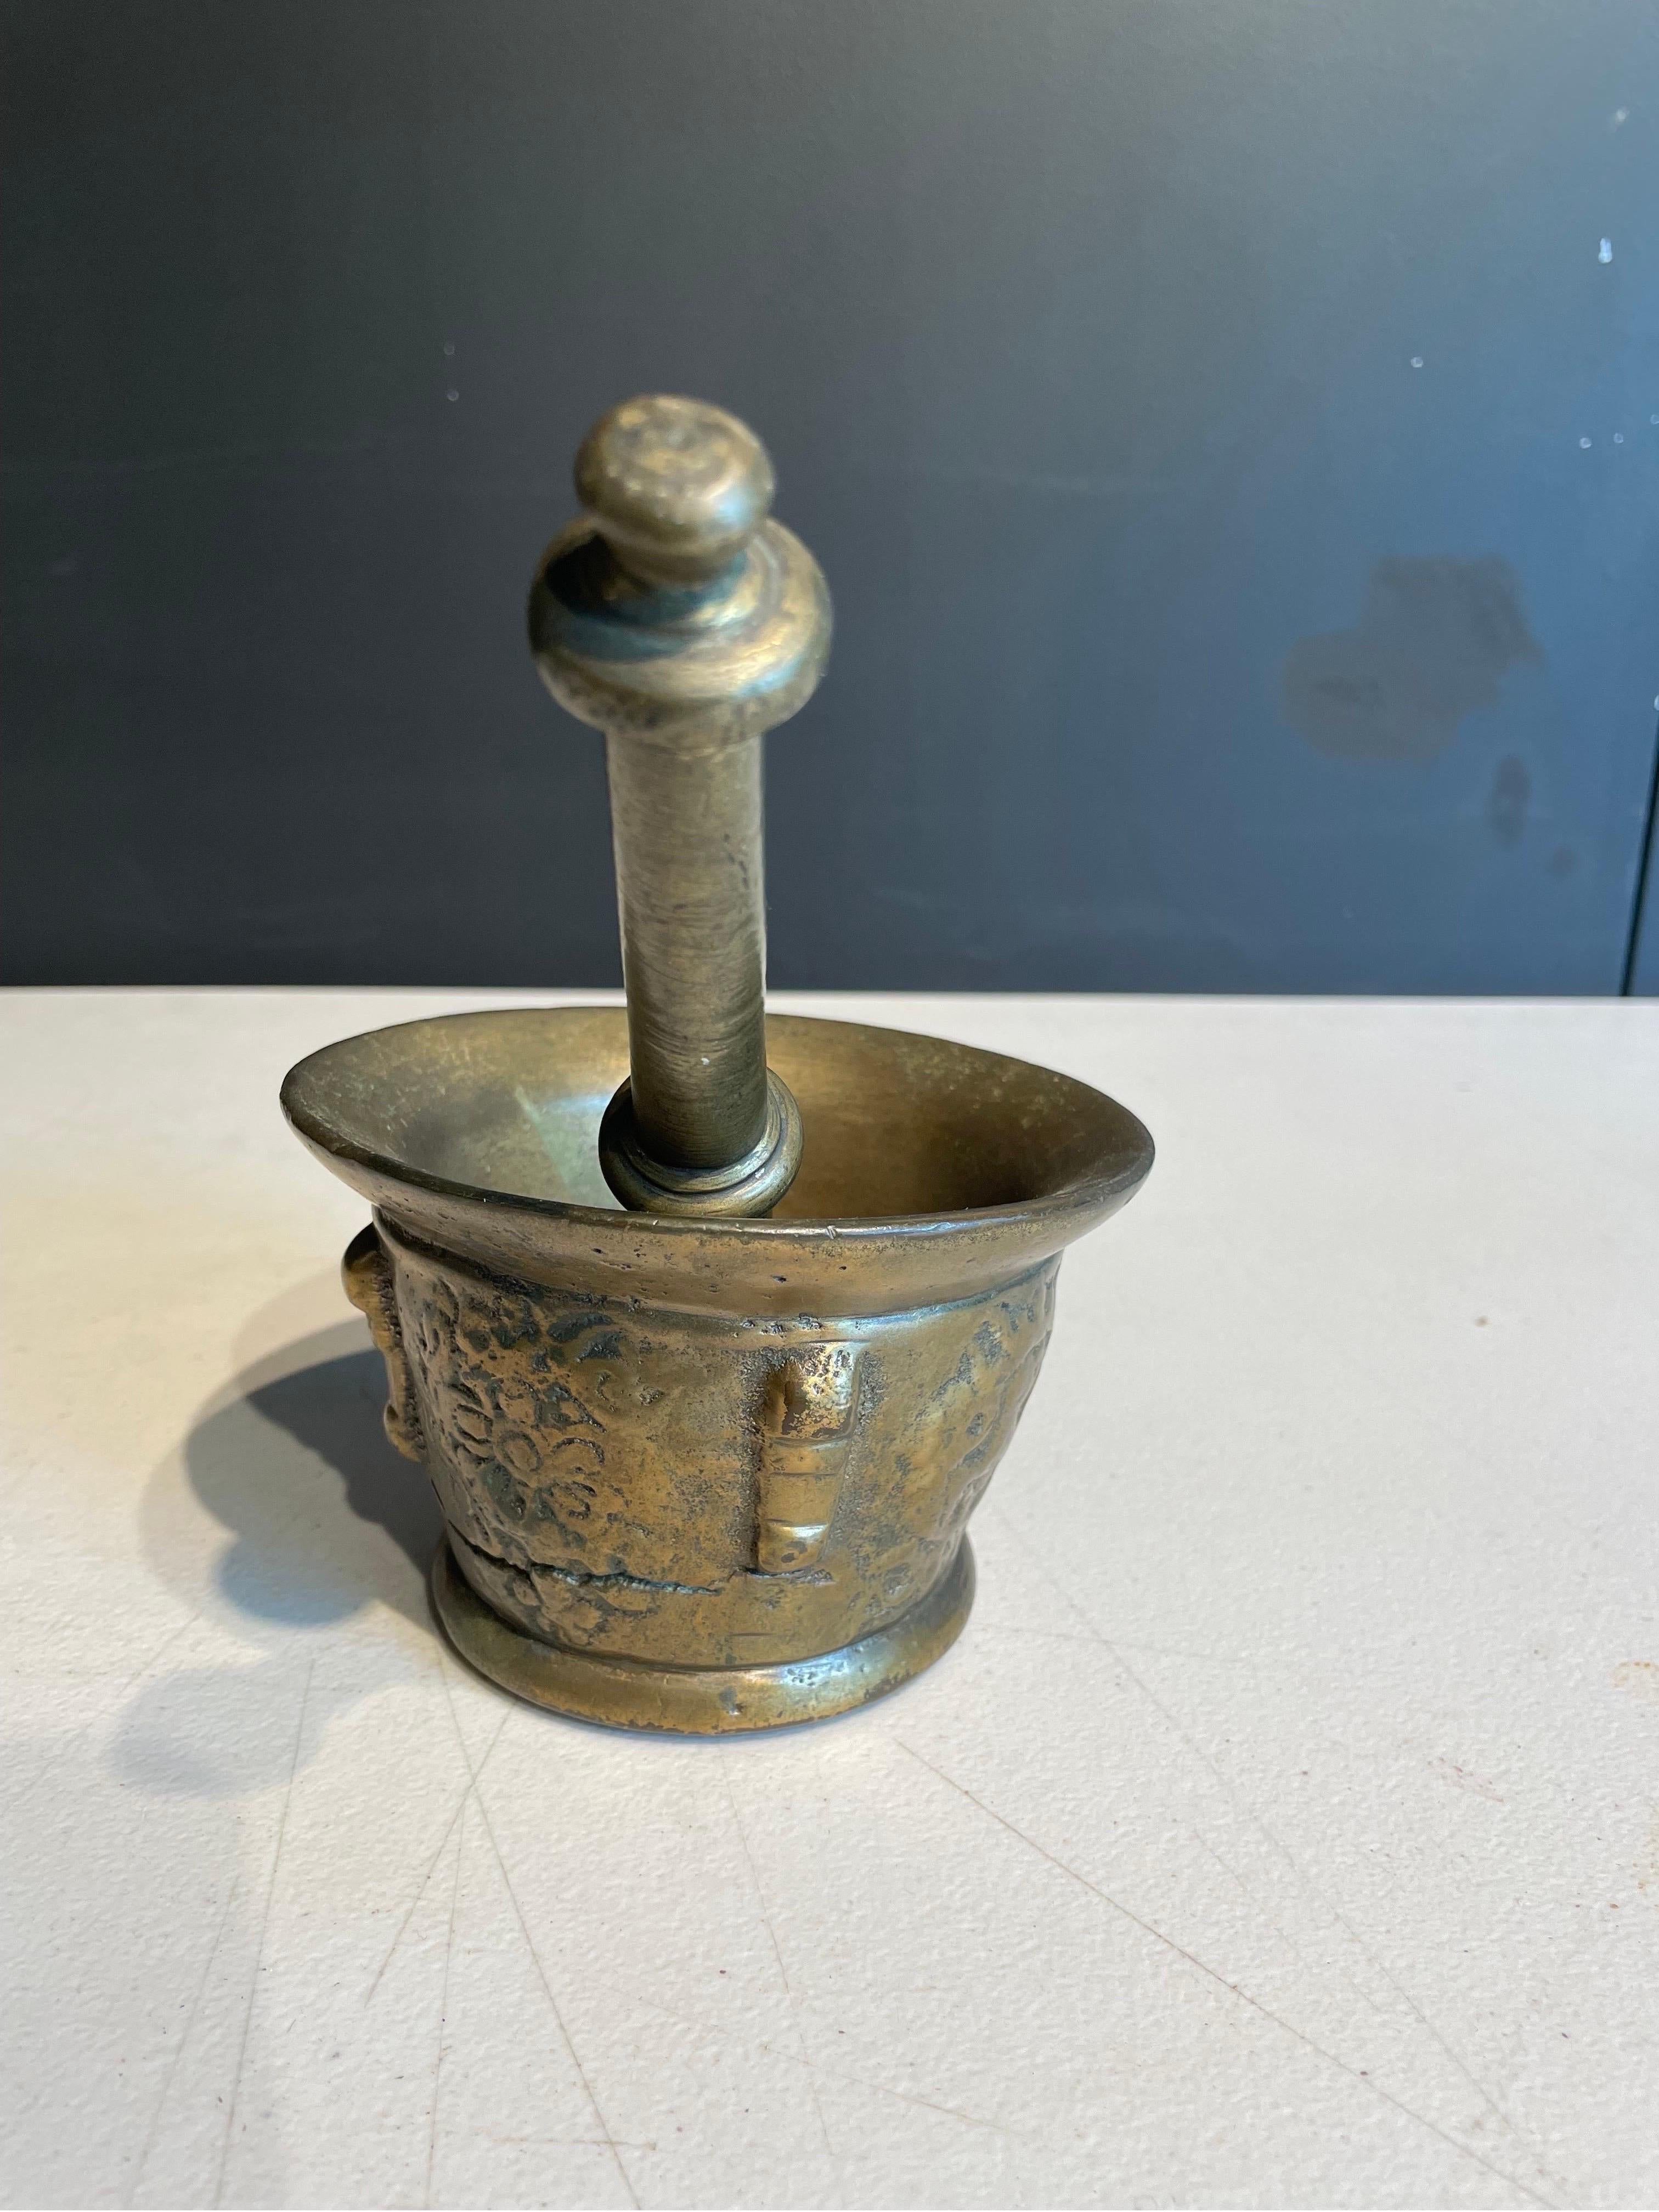 An Antique Brass Mortar with Pestle, 19th Century

Dimension: Mortar: Height: 8.4 cm Diameter: 13 cm. Pestle: Height: 20.5 cm Diameter: 4.2 cm (Widest Point) 1.5 (Narrowest Point).

Provenance: Private Sydney Collection.